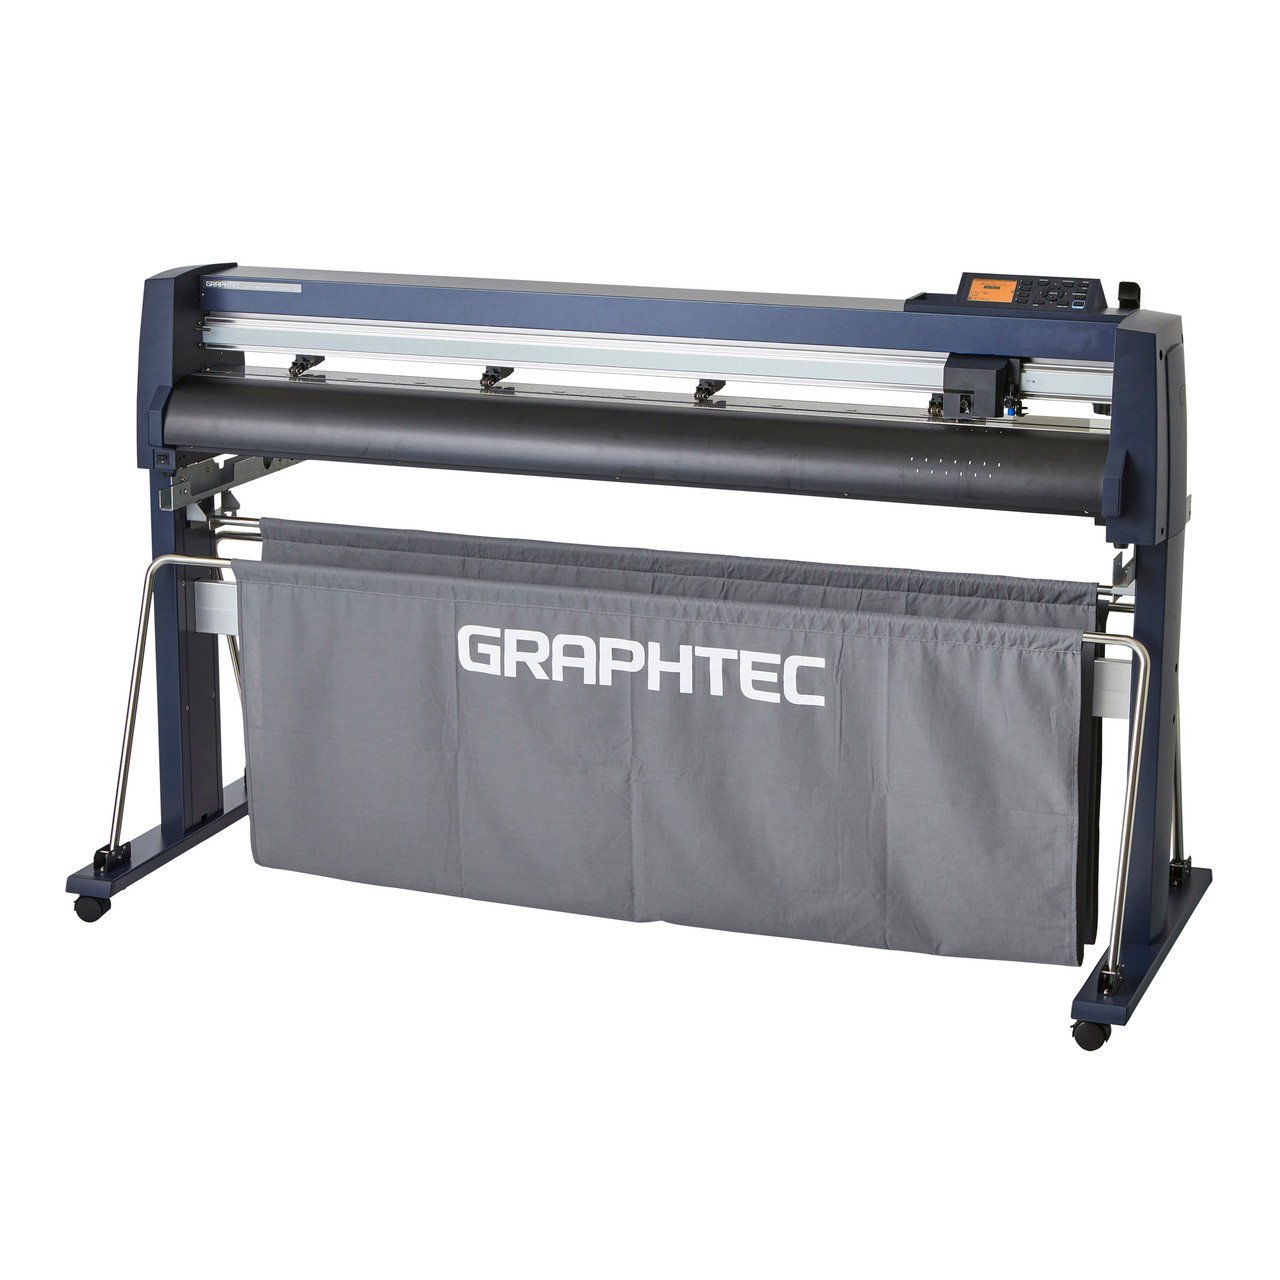 Graphtec FC9000-140 Series Cutting Plotter - (54" wide with basket & stand)  - American Print Consultants